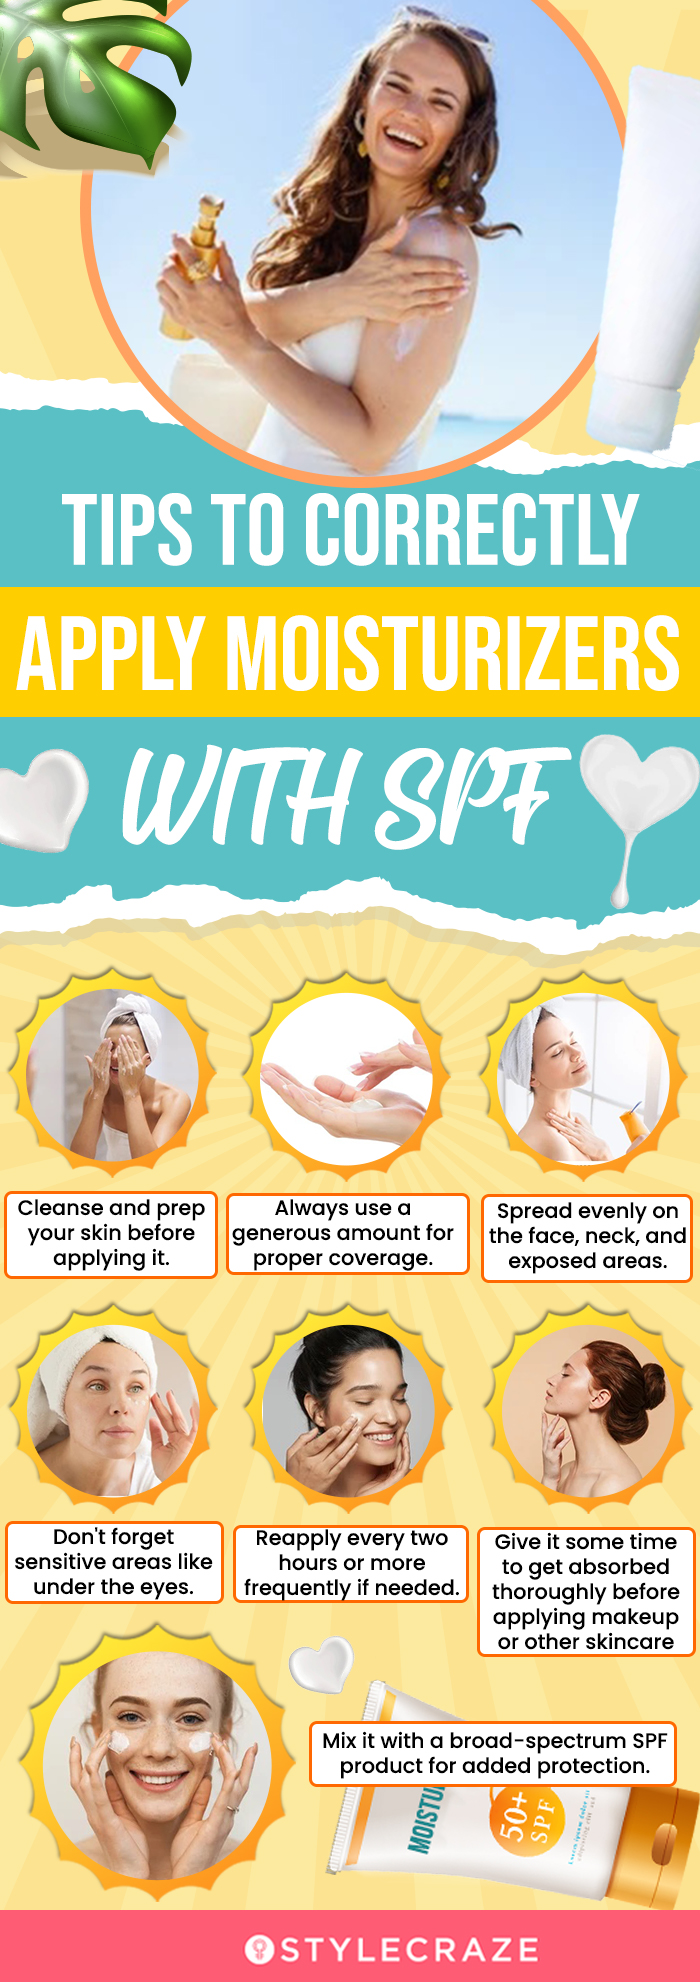 Tips To Correctly Apply Moisturizers With SPF (infographic)